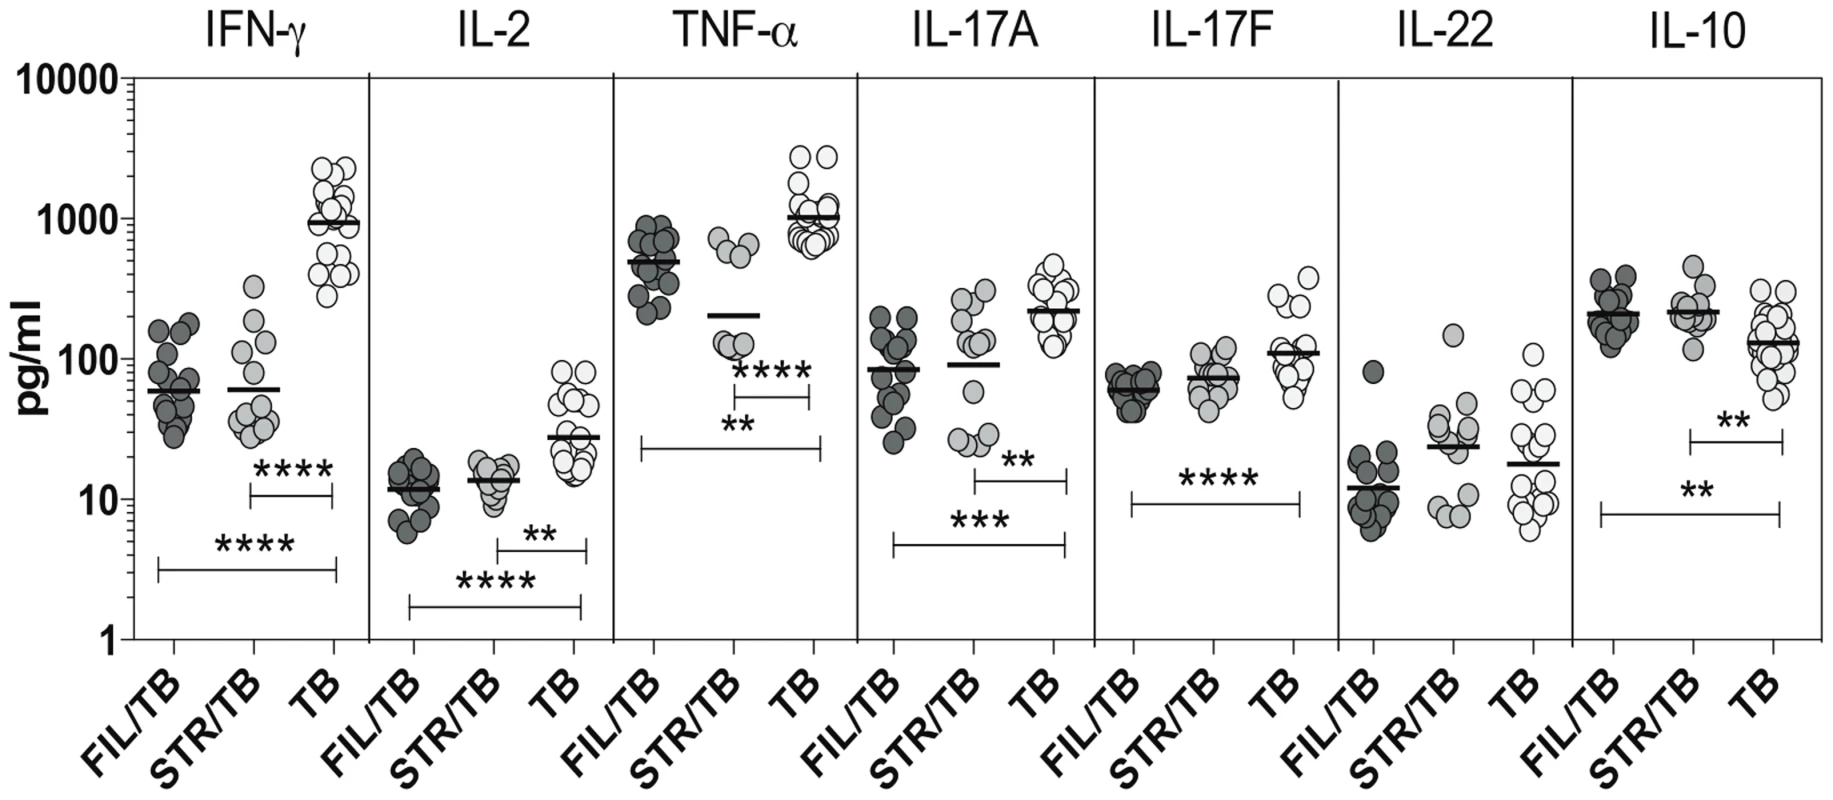 Helminth infections are associated with diminished plasma levels of Th1 and Th17 cytokines in active TB.